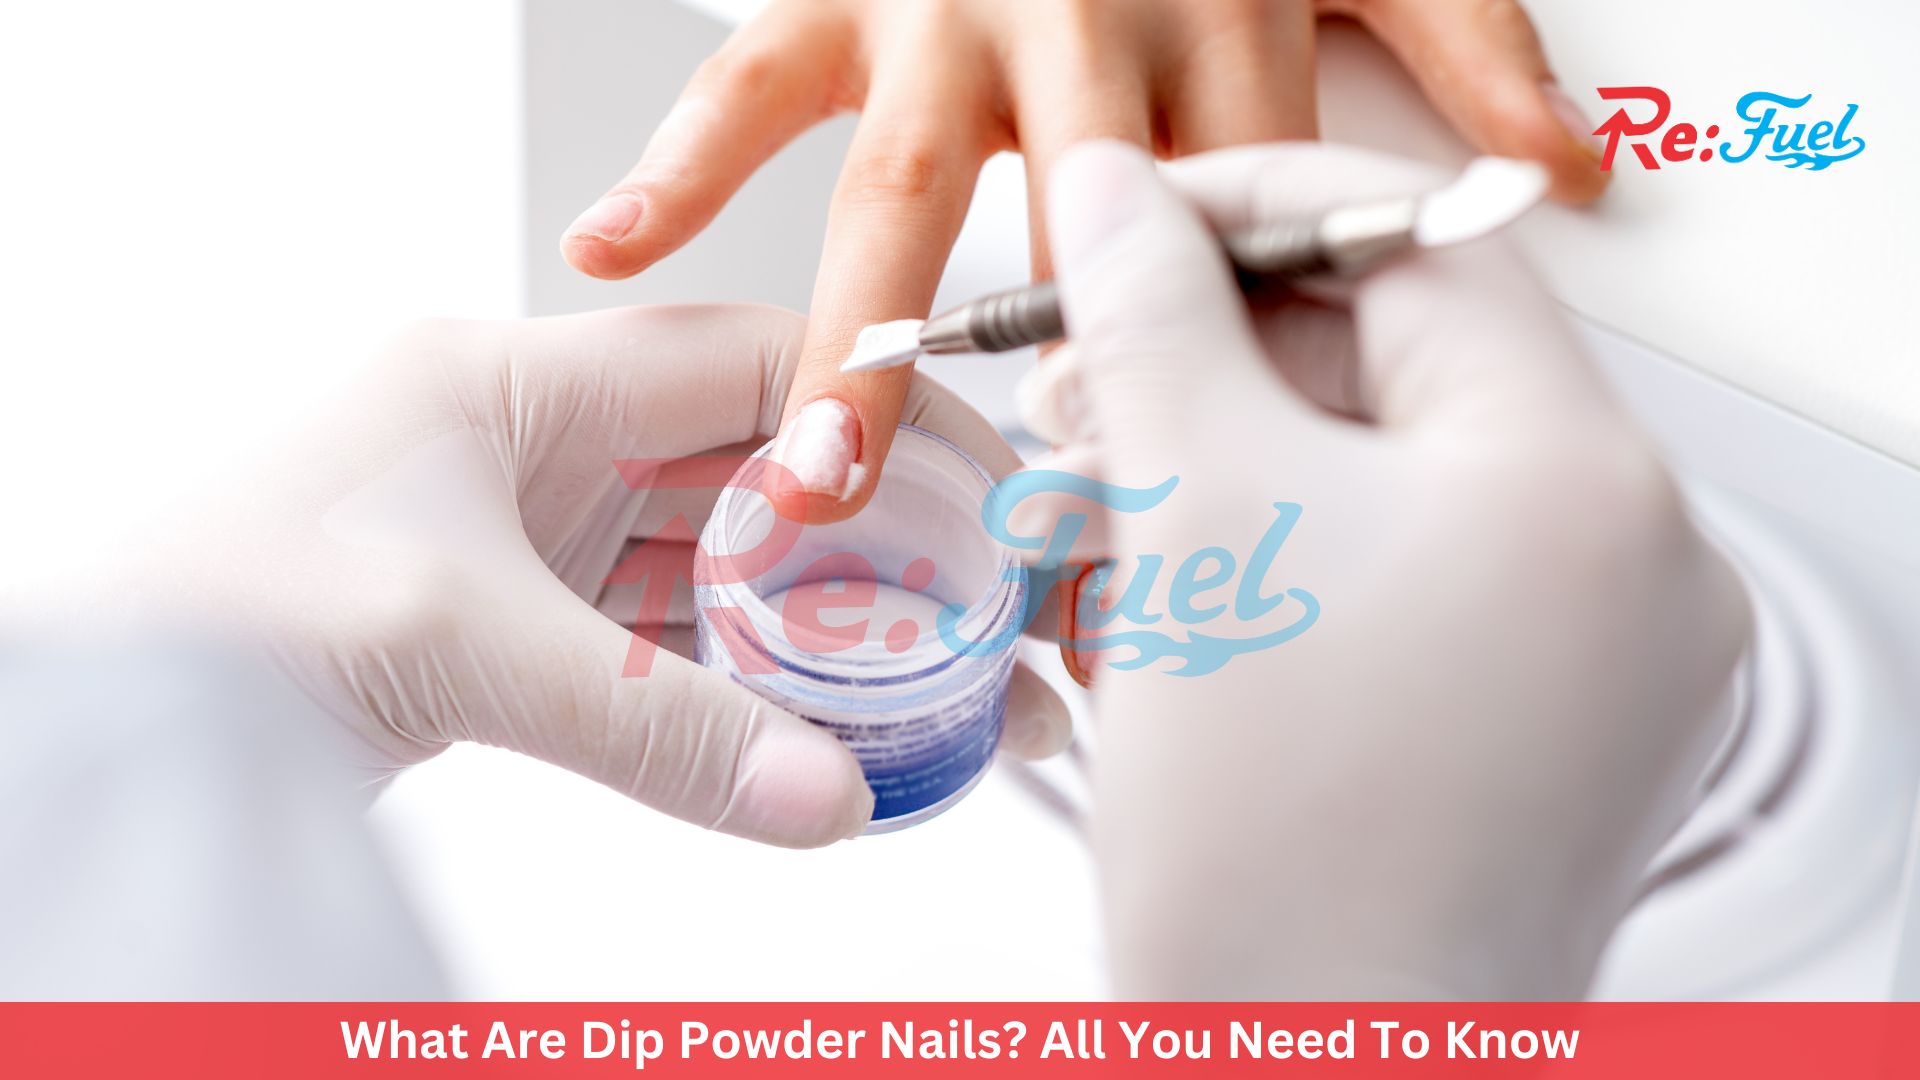 What Are Dip Powder Nails? All You Need To Know